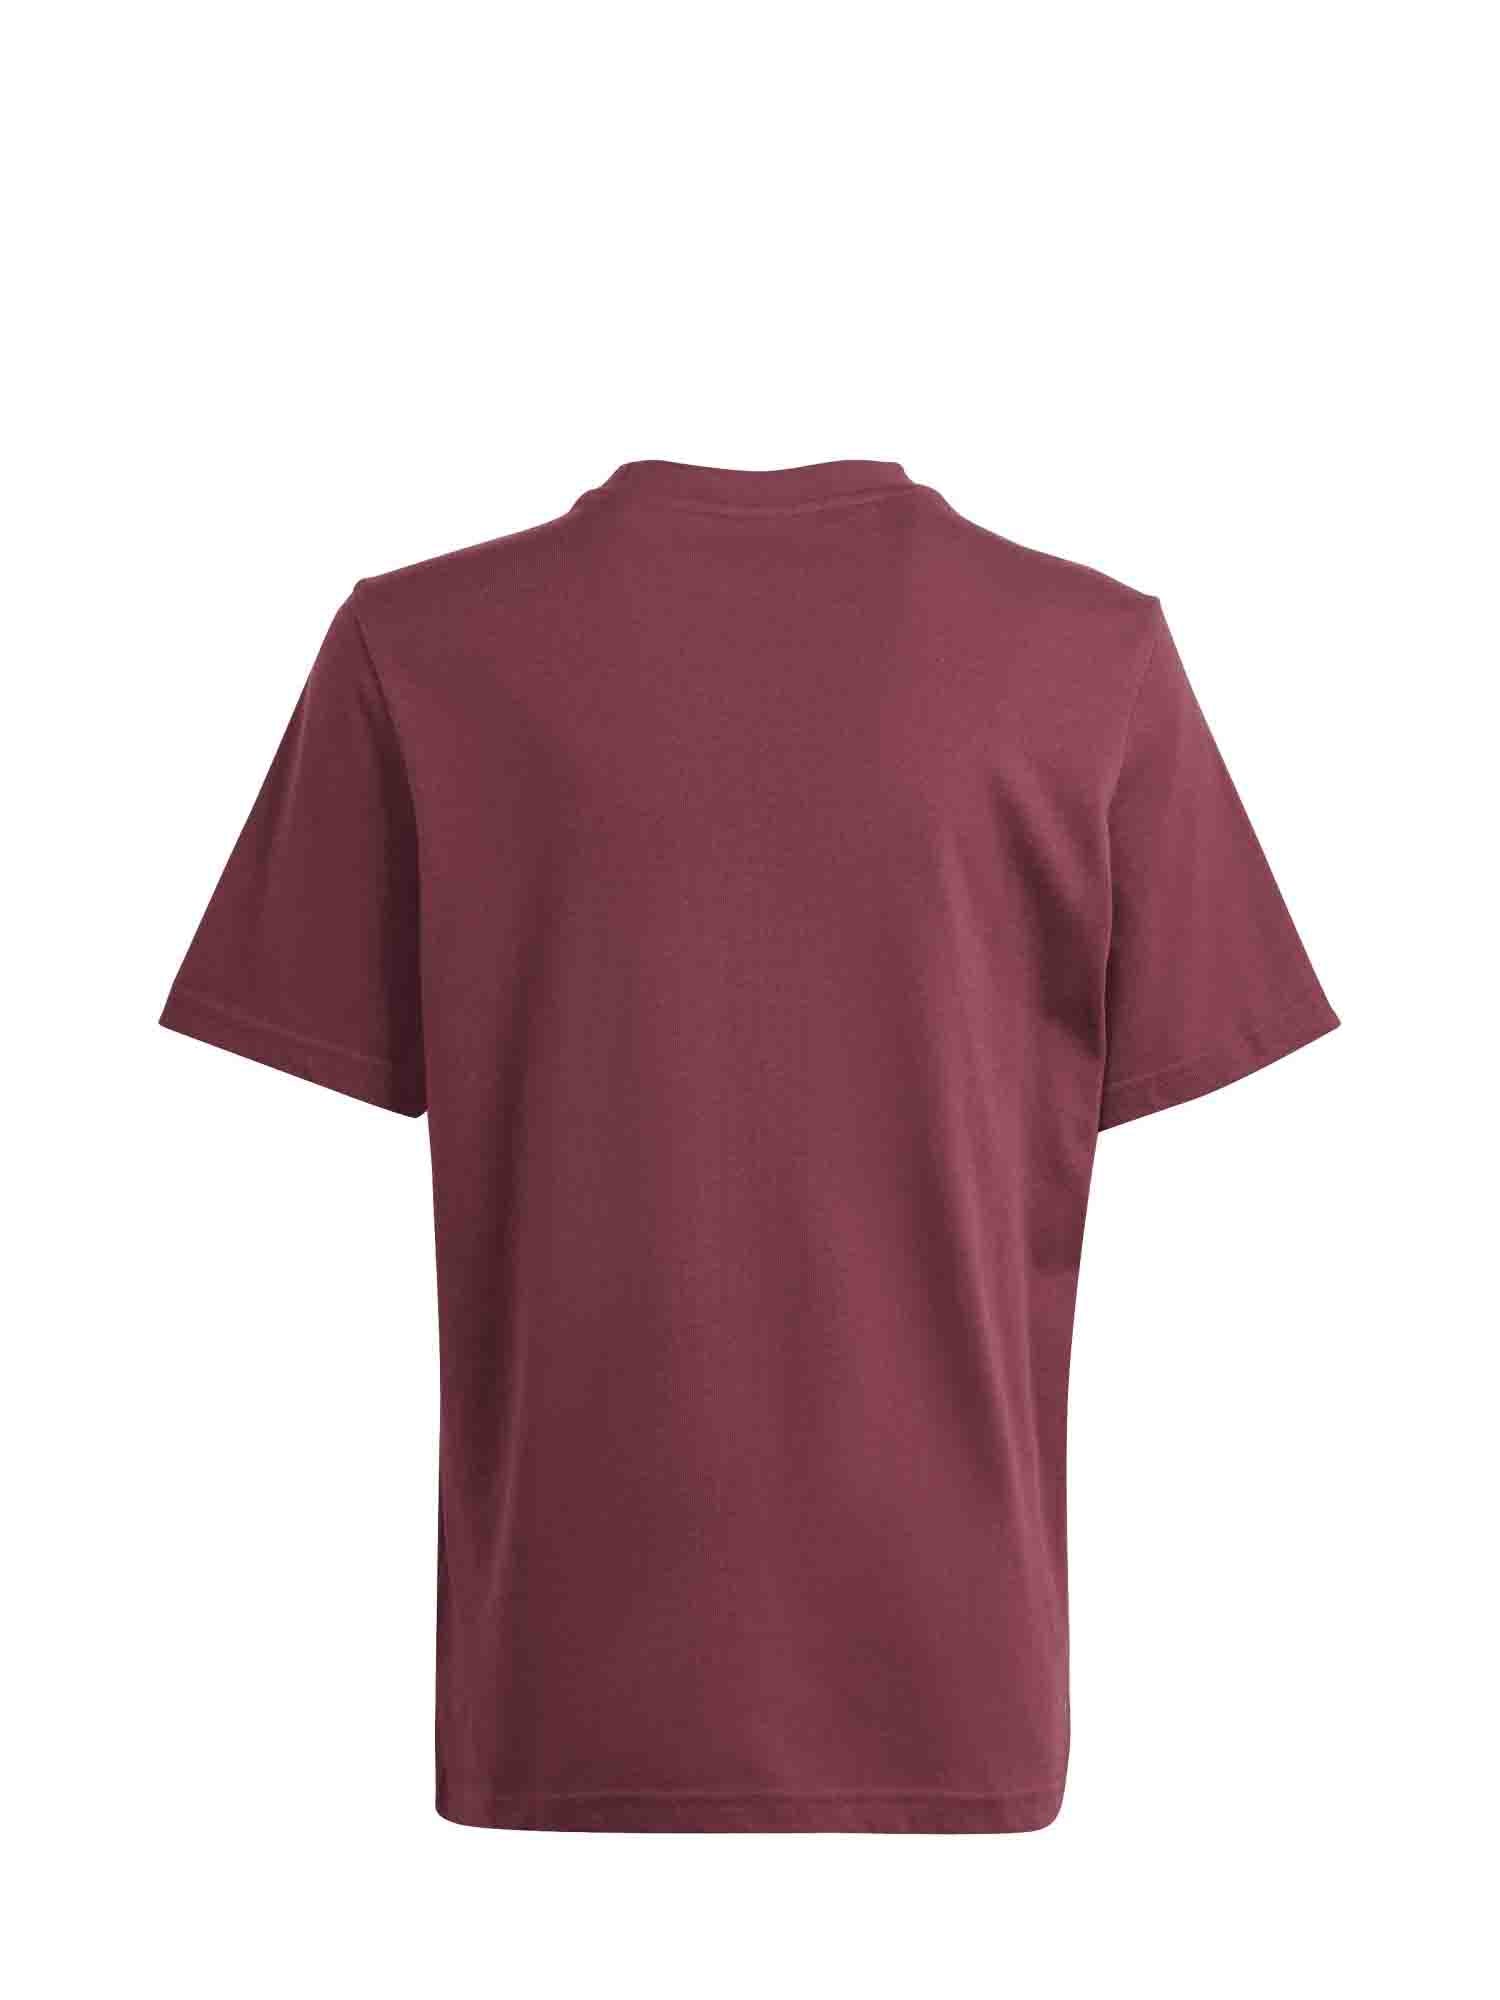 ADIDAS TABLE TEE FOLDED GRAPHIC T-SHIRT JUNIOR BORDEAUX